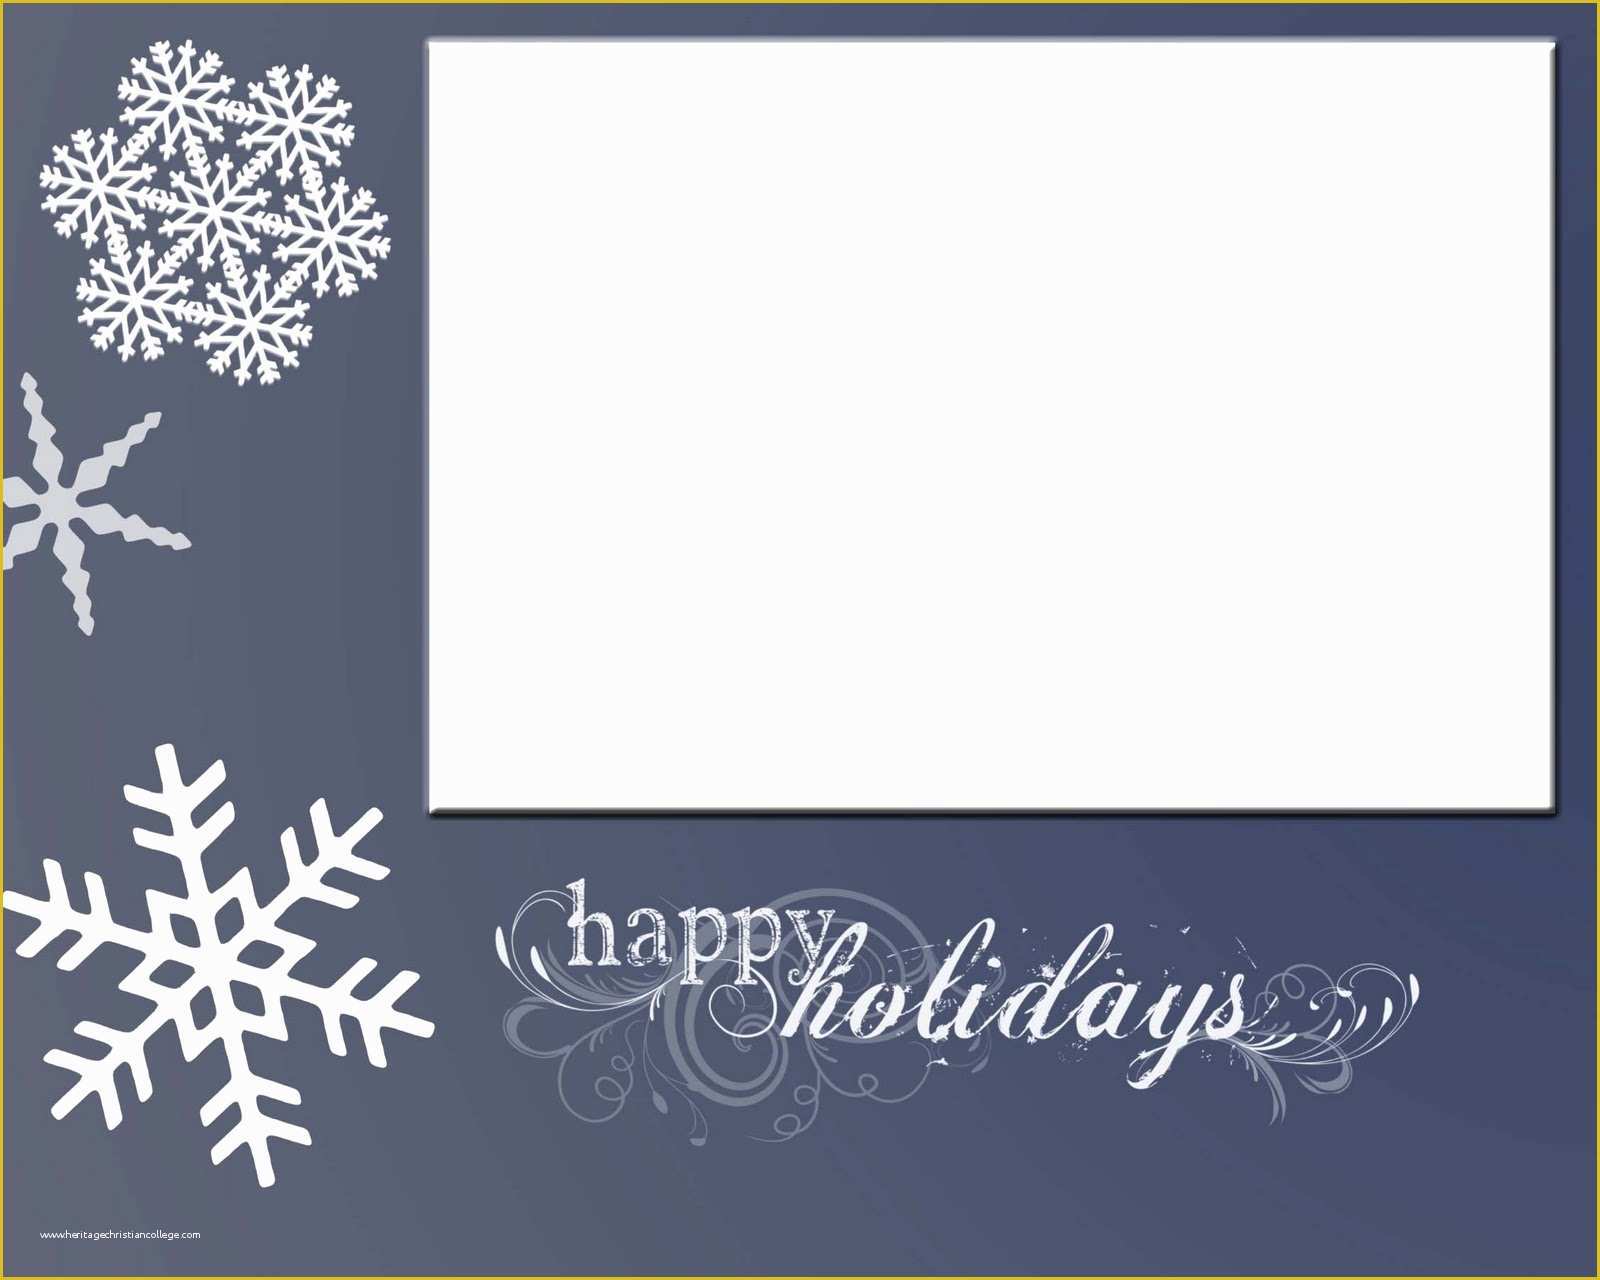 Seasons Greetings Card Templates Free Of Lovely Little Snippets Christmas Card Display and 5 Free